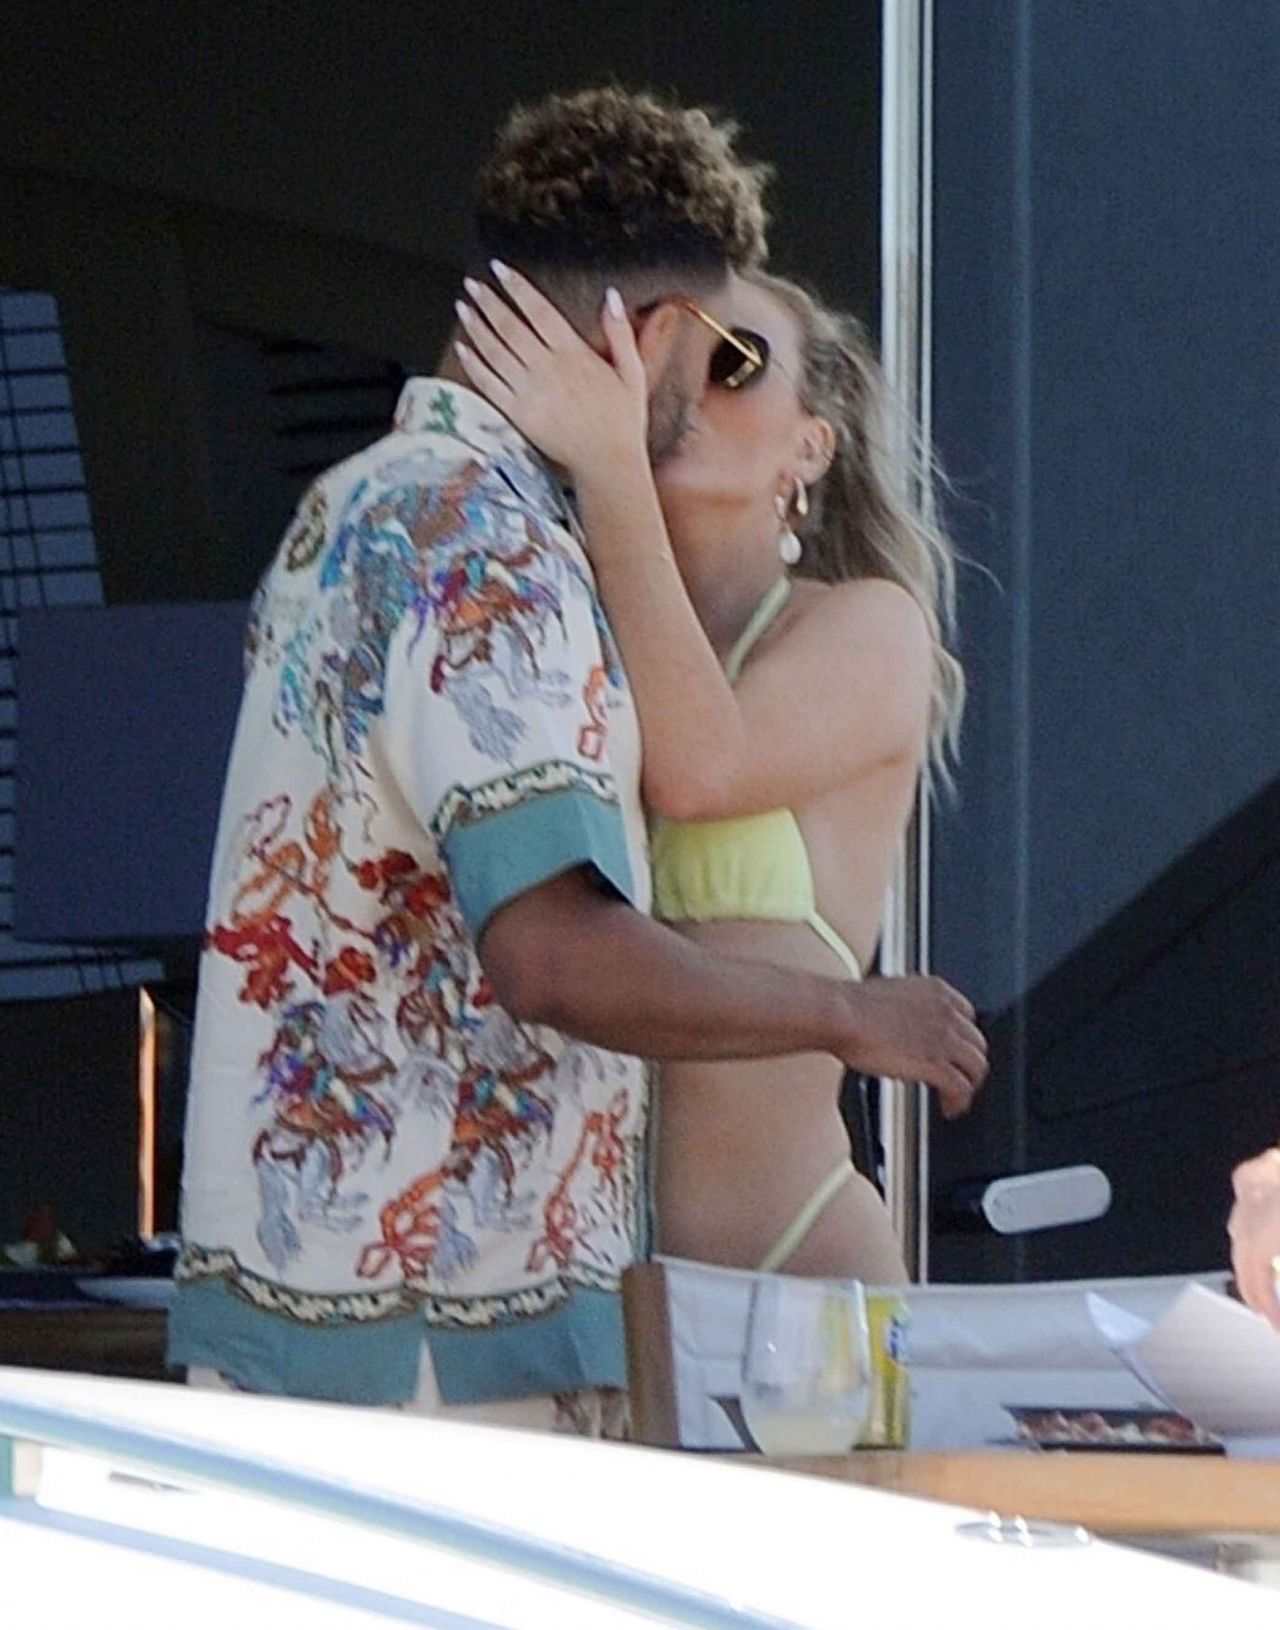 perrie-edwards-and-alex-oxlade-chamberlain-holiday-in-ibiza-06-05-2019-0.jpg